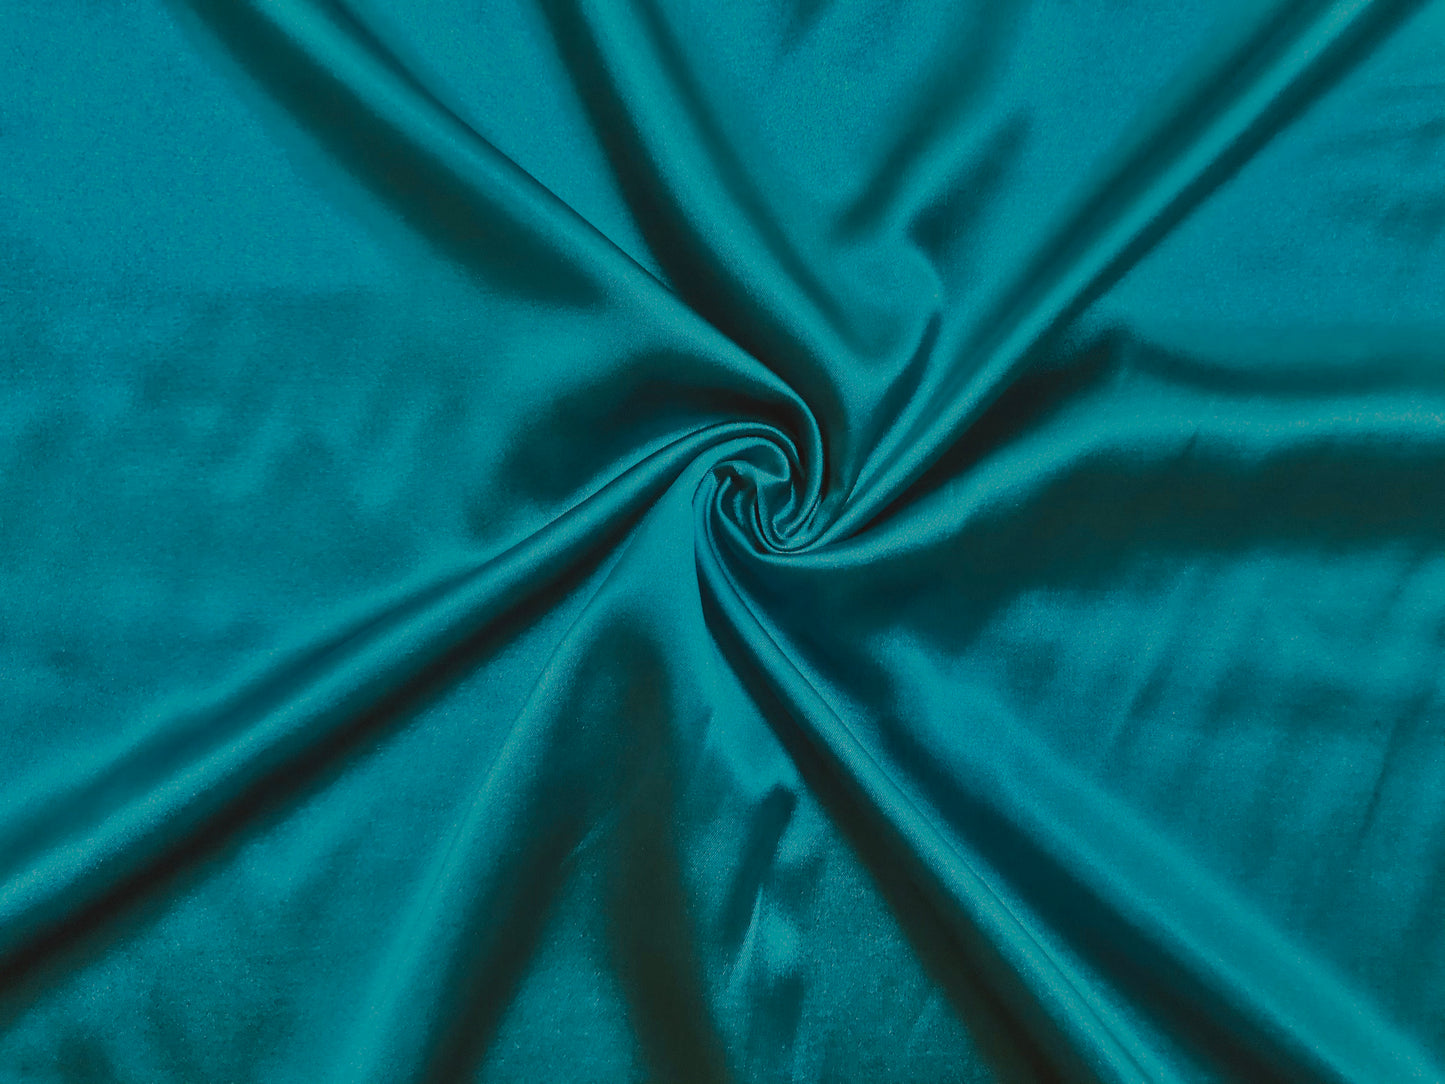 Charmeuse Satin Fabric-Teal Solid Color-CSFC001-Sold by the Yard